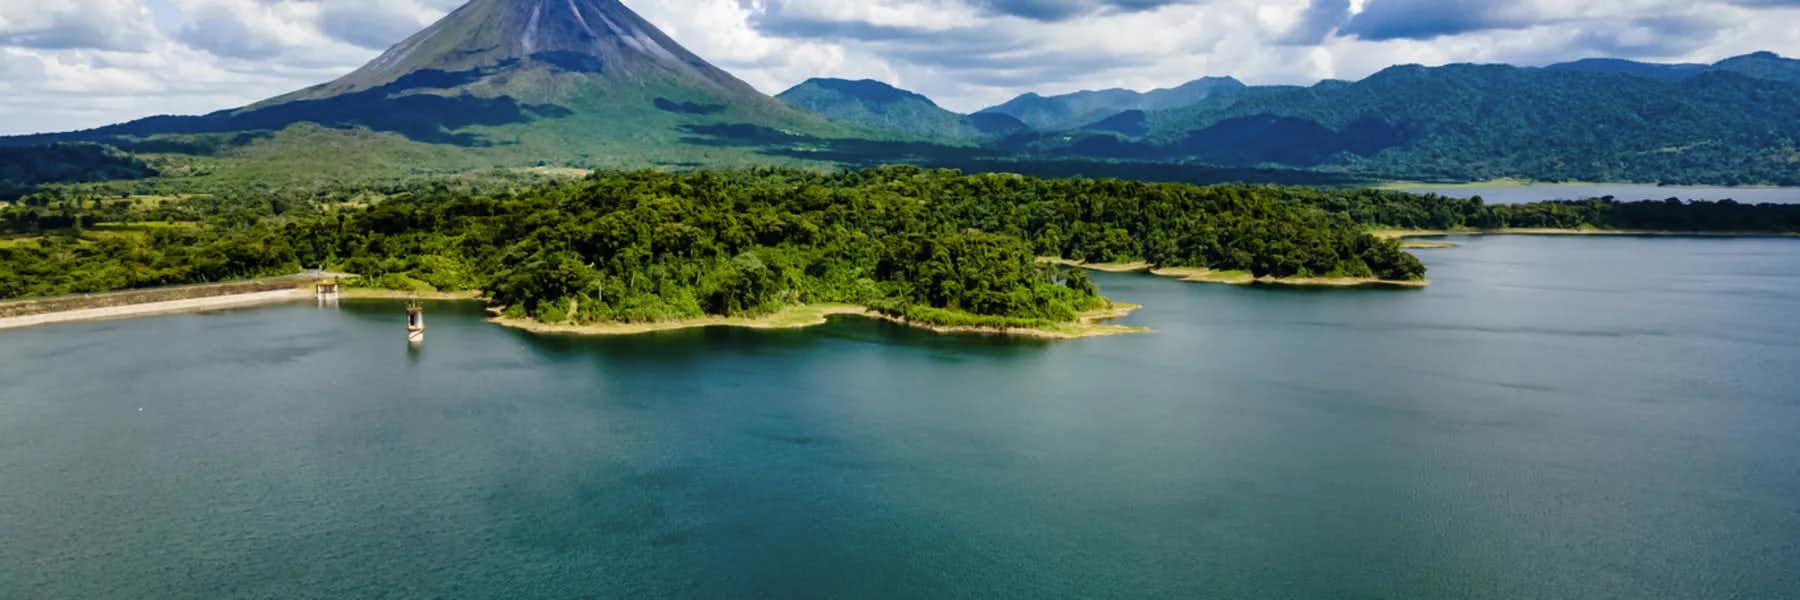 $1,500 a Month in Lake Arenal, Costa Rica 